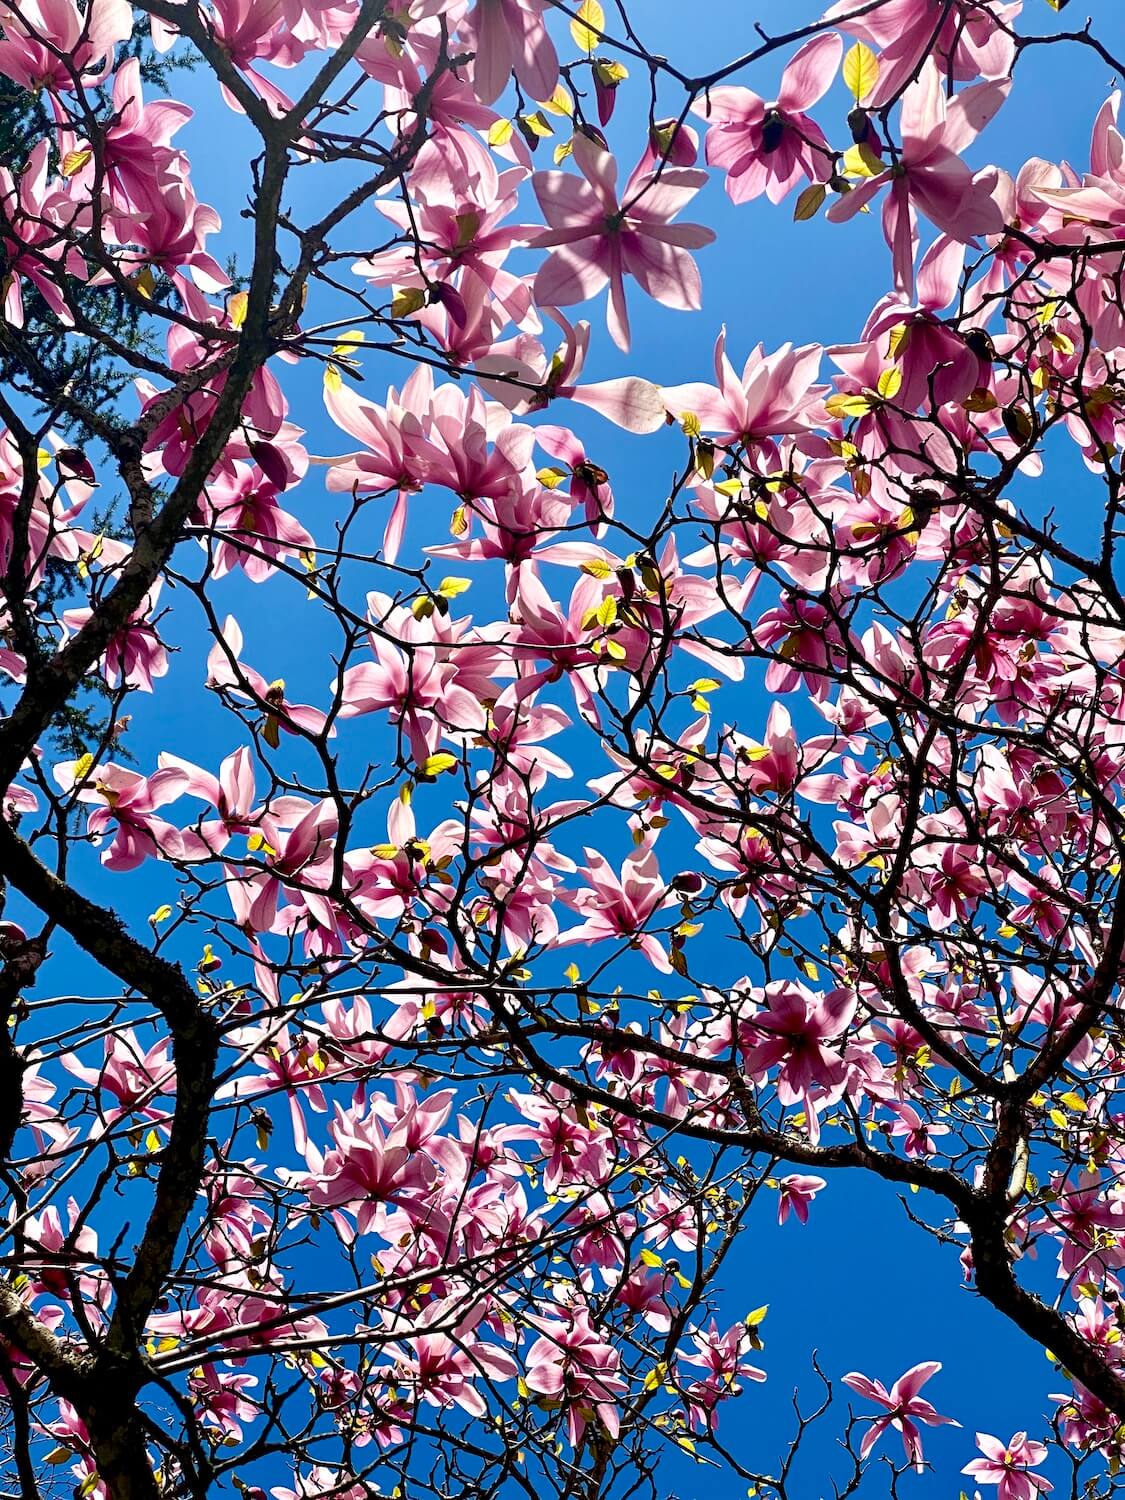 Brightly popping pink magnolia blossoms open up to the blue sky and the branches of the tree appear dark, shadowed by all the flowers.  